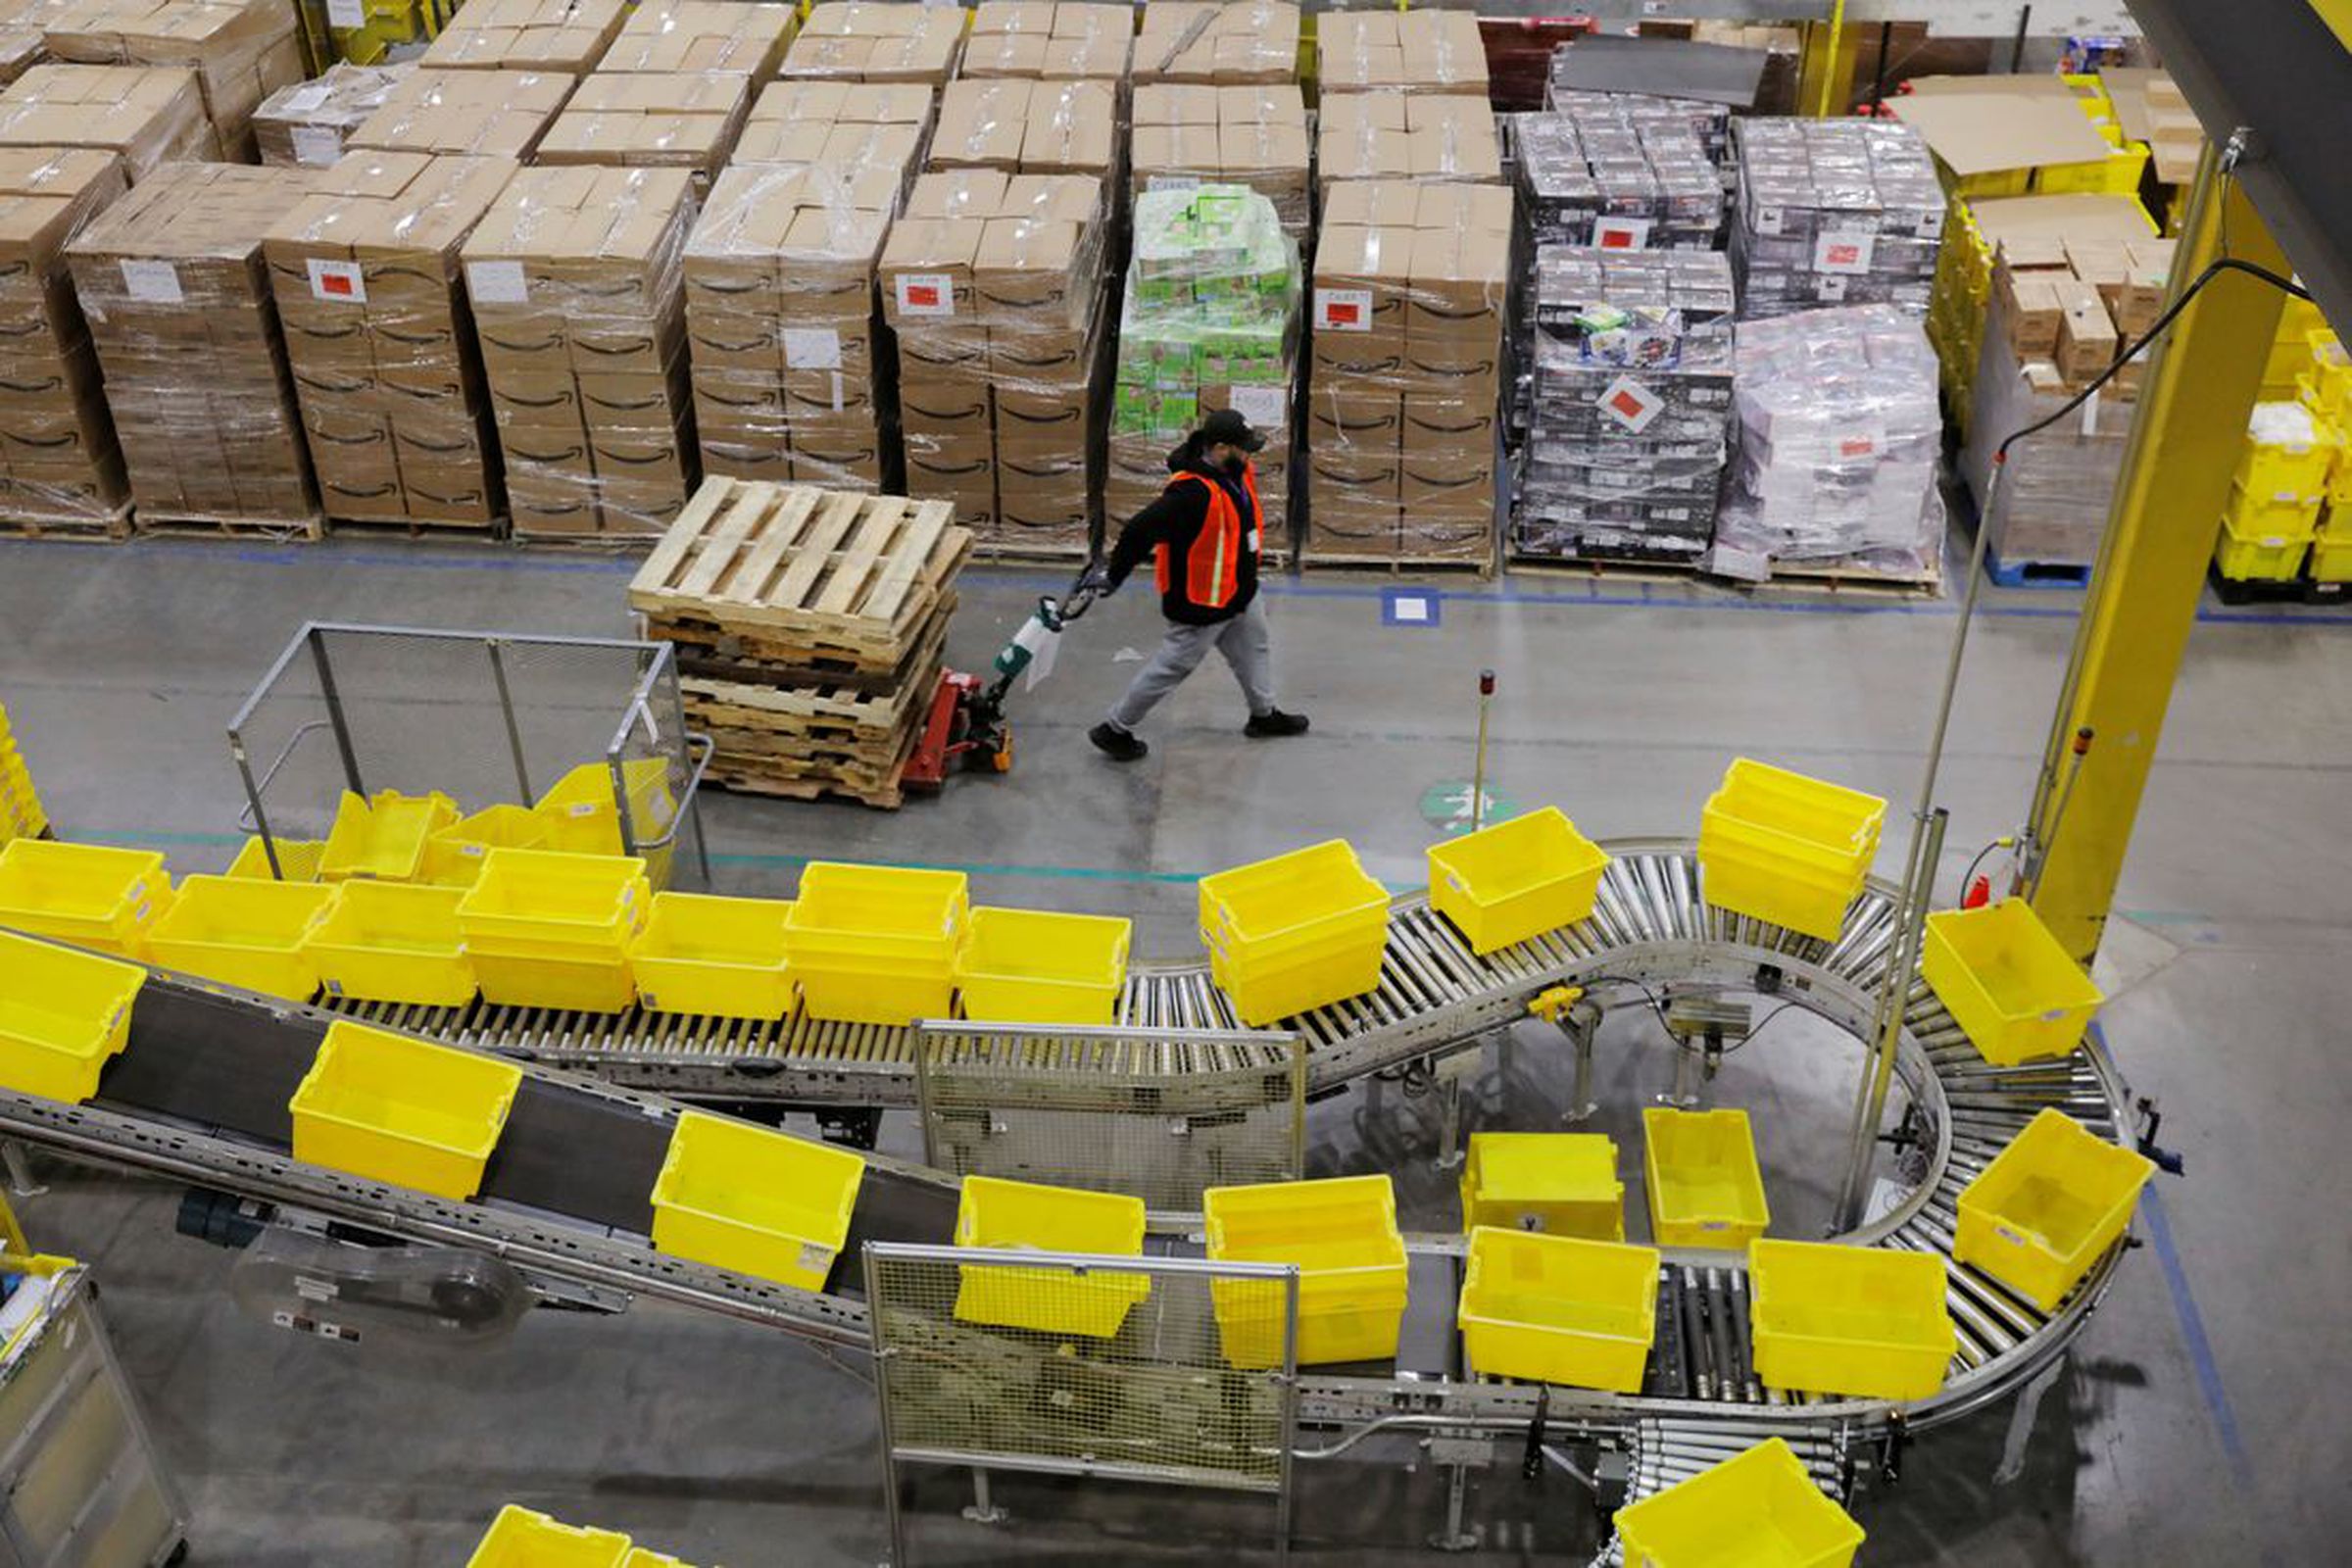 Amazon workers perform their jobs inside of an Amazon fulfillment center.